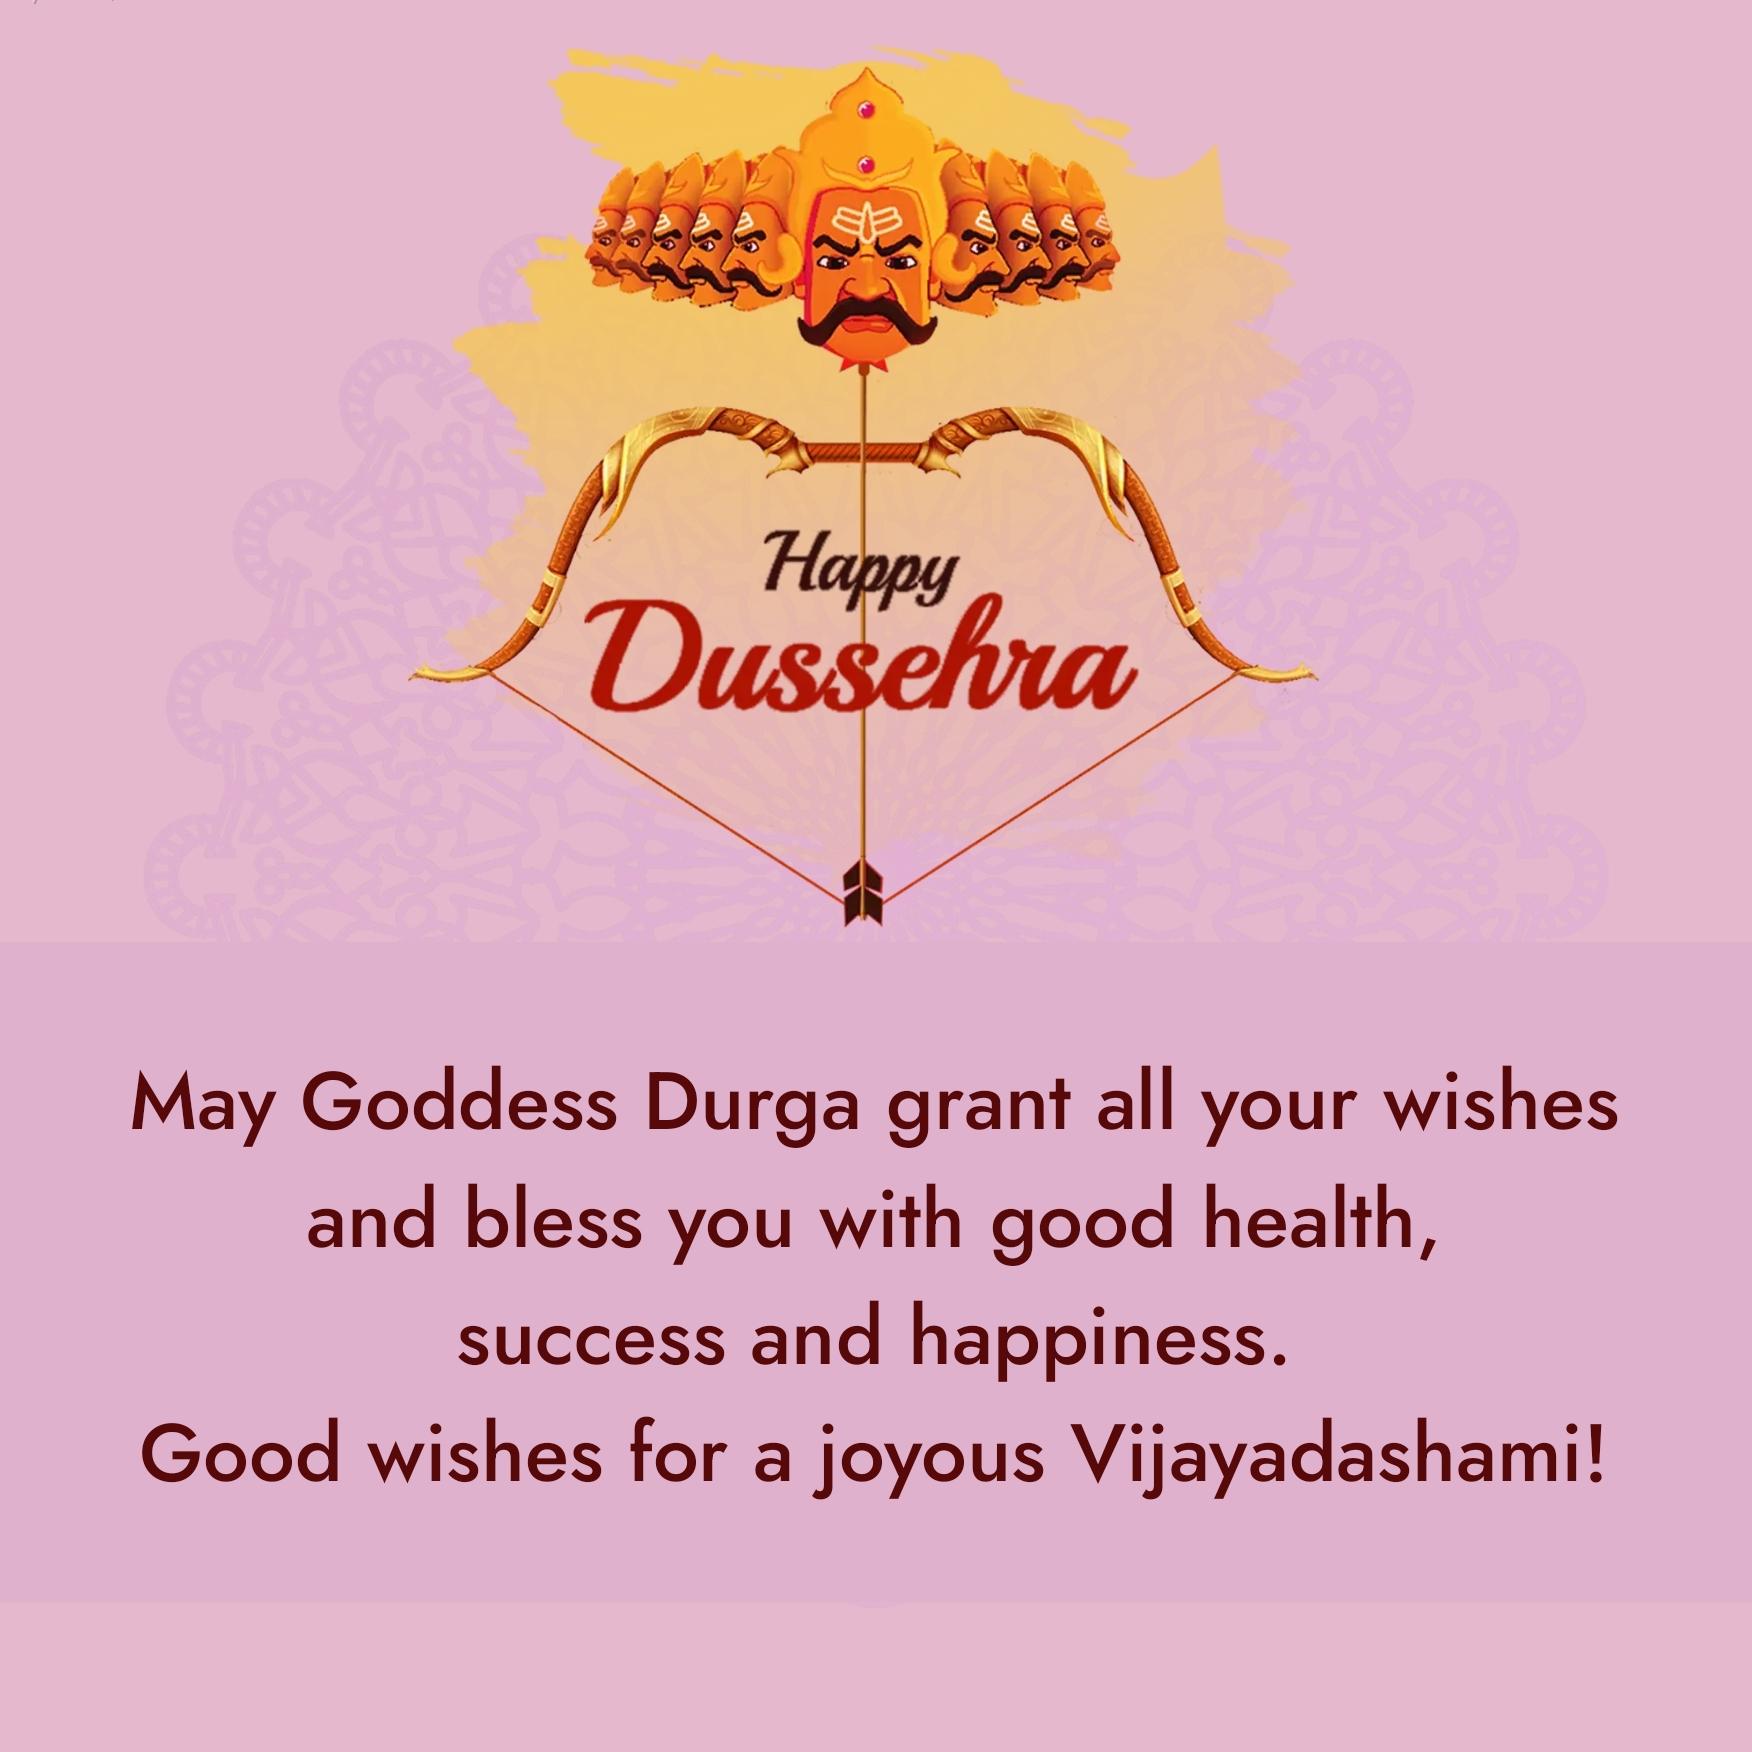 May Goddess Durga grant all your wishes and bless you